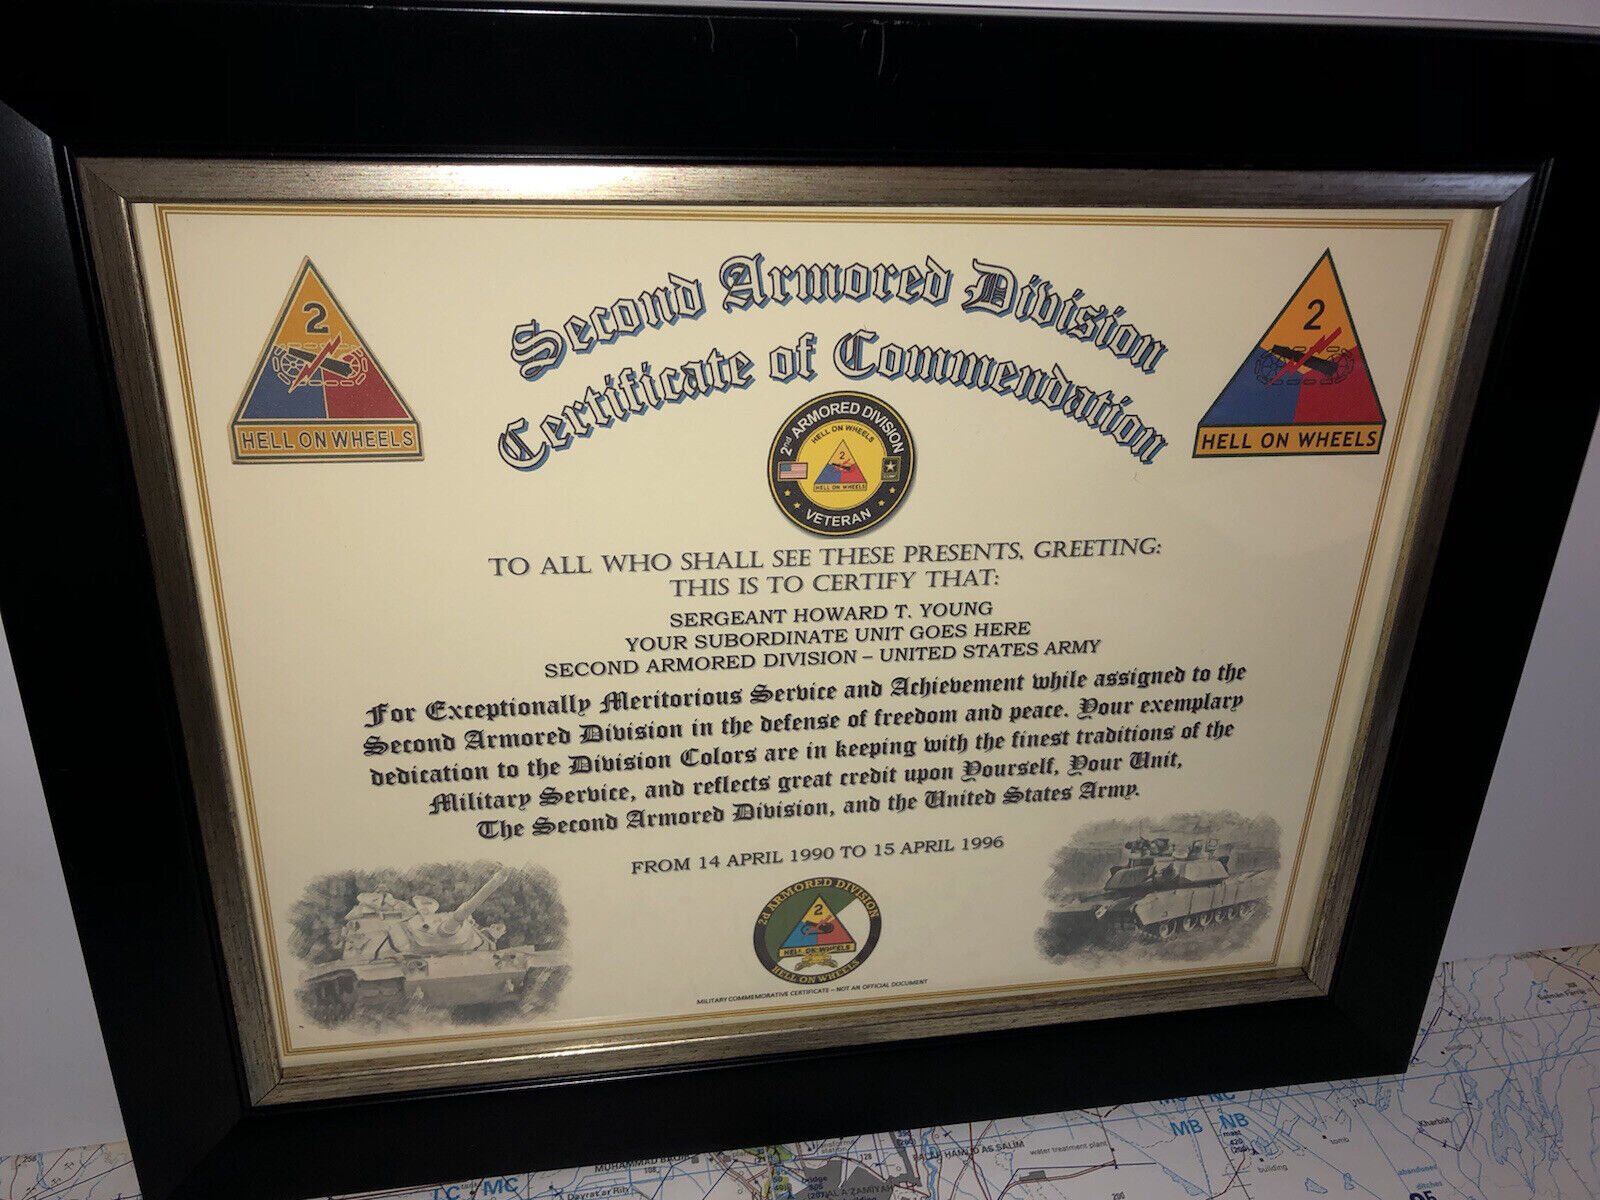 2ND ARMORED DIVISION / COMMEMORATIVE - CERTIFICATE OF COMMENDATION